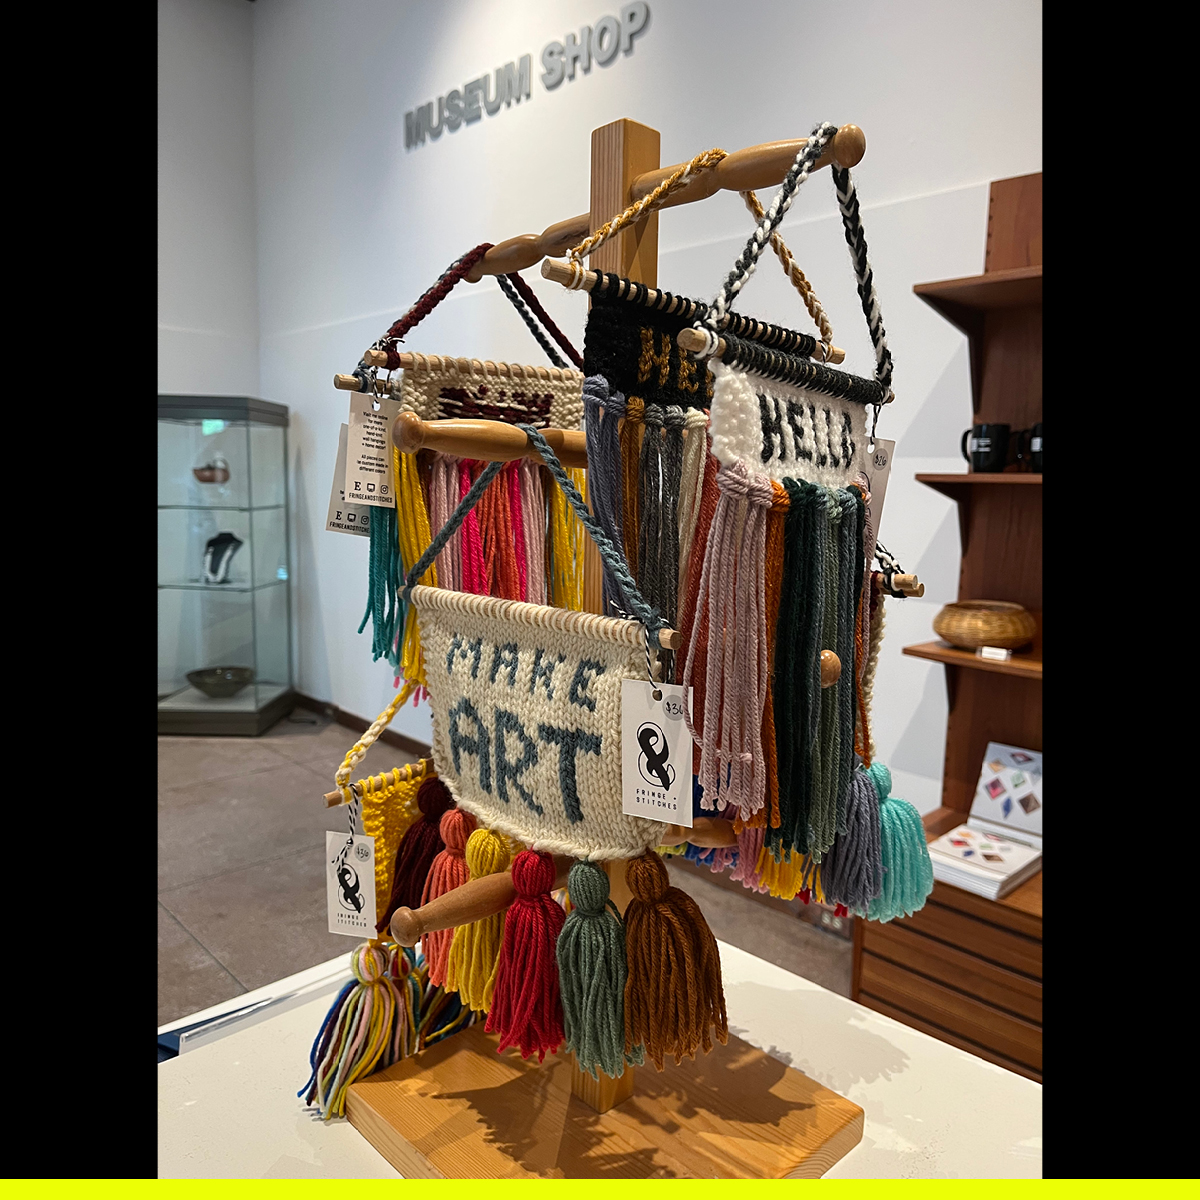 🛍Stop by the #museumshop this weekend and pick up a one-of-a-kind hand-knit wall hanging by Fringe and Stitches, a one-woman team from Binghamton.